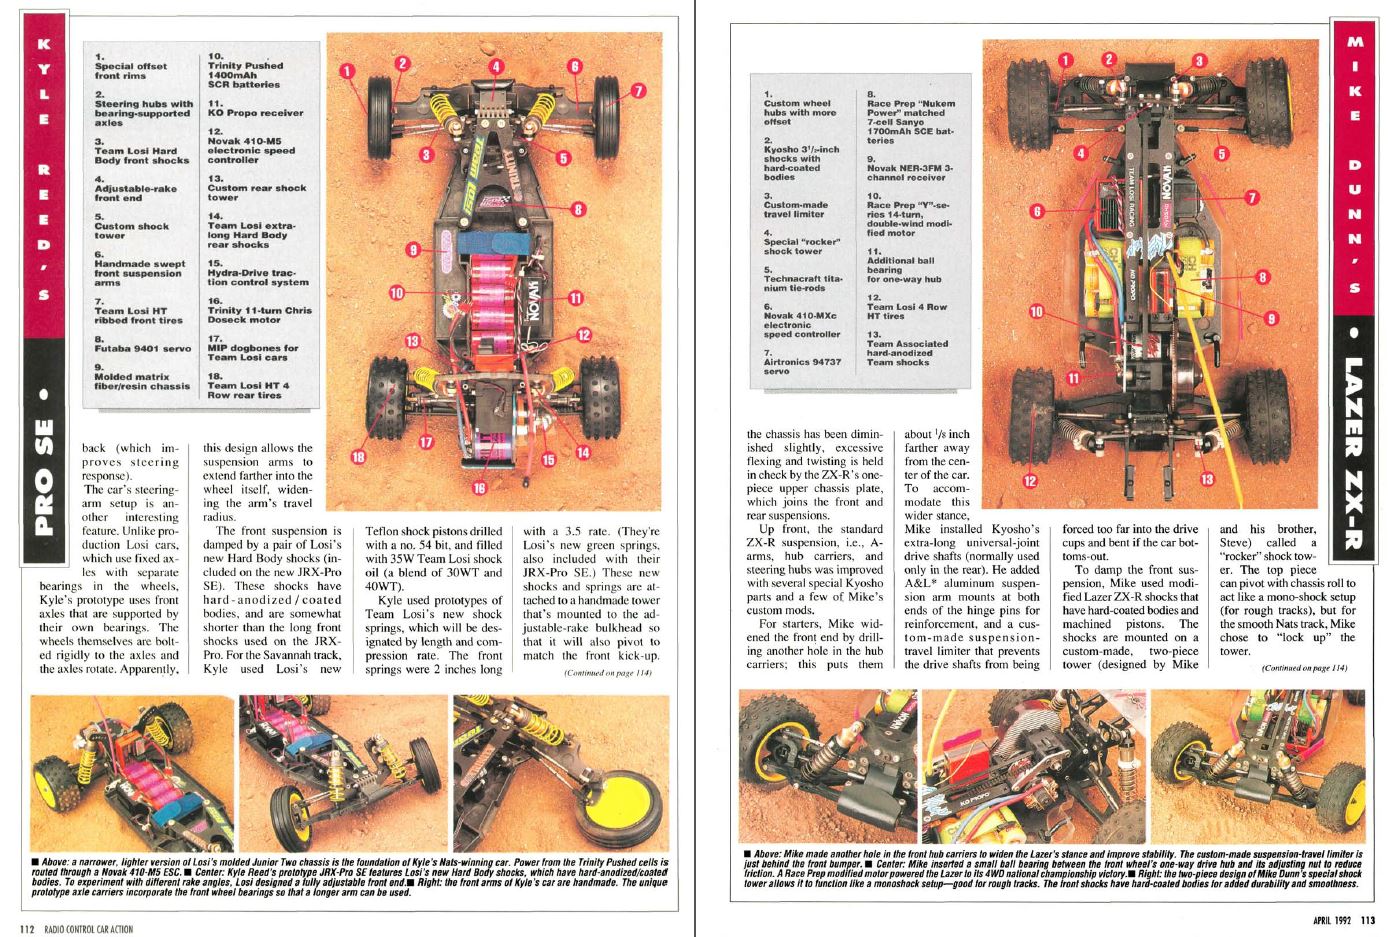 #TBT Kyle Reed's Losi JRX-Pro SE & Mike Dunn's Kyosho Lazer ZX-R Featured In The April 1992 issue